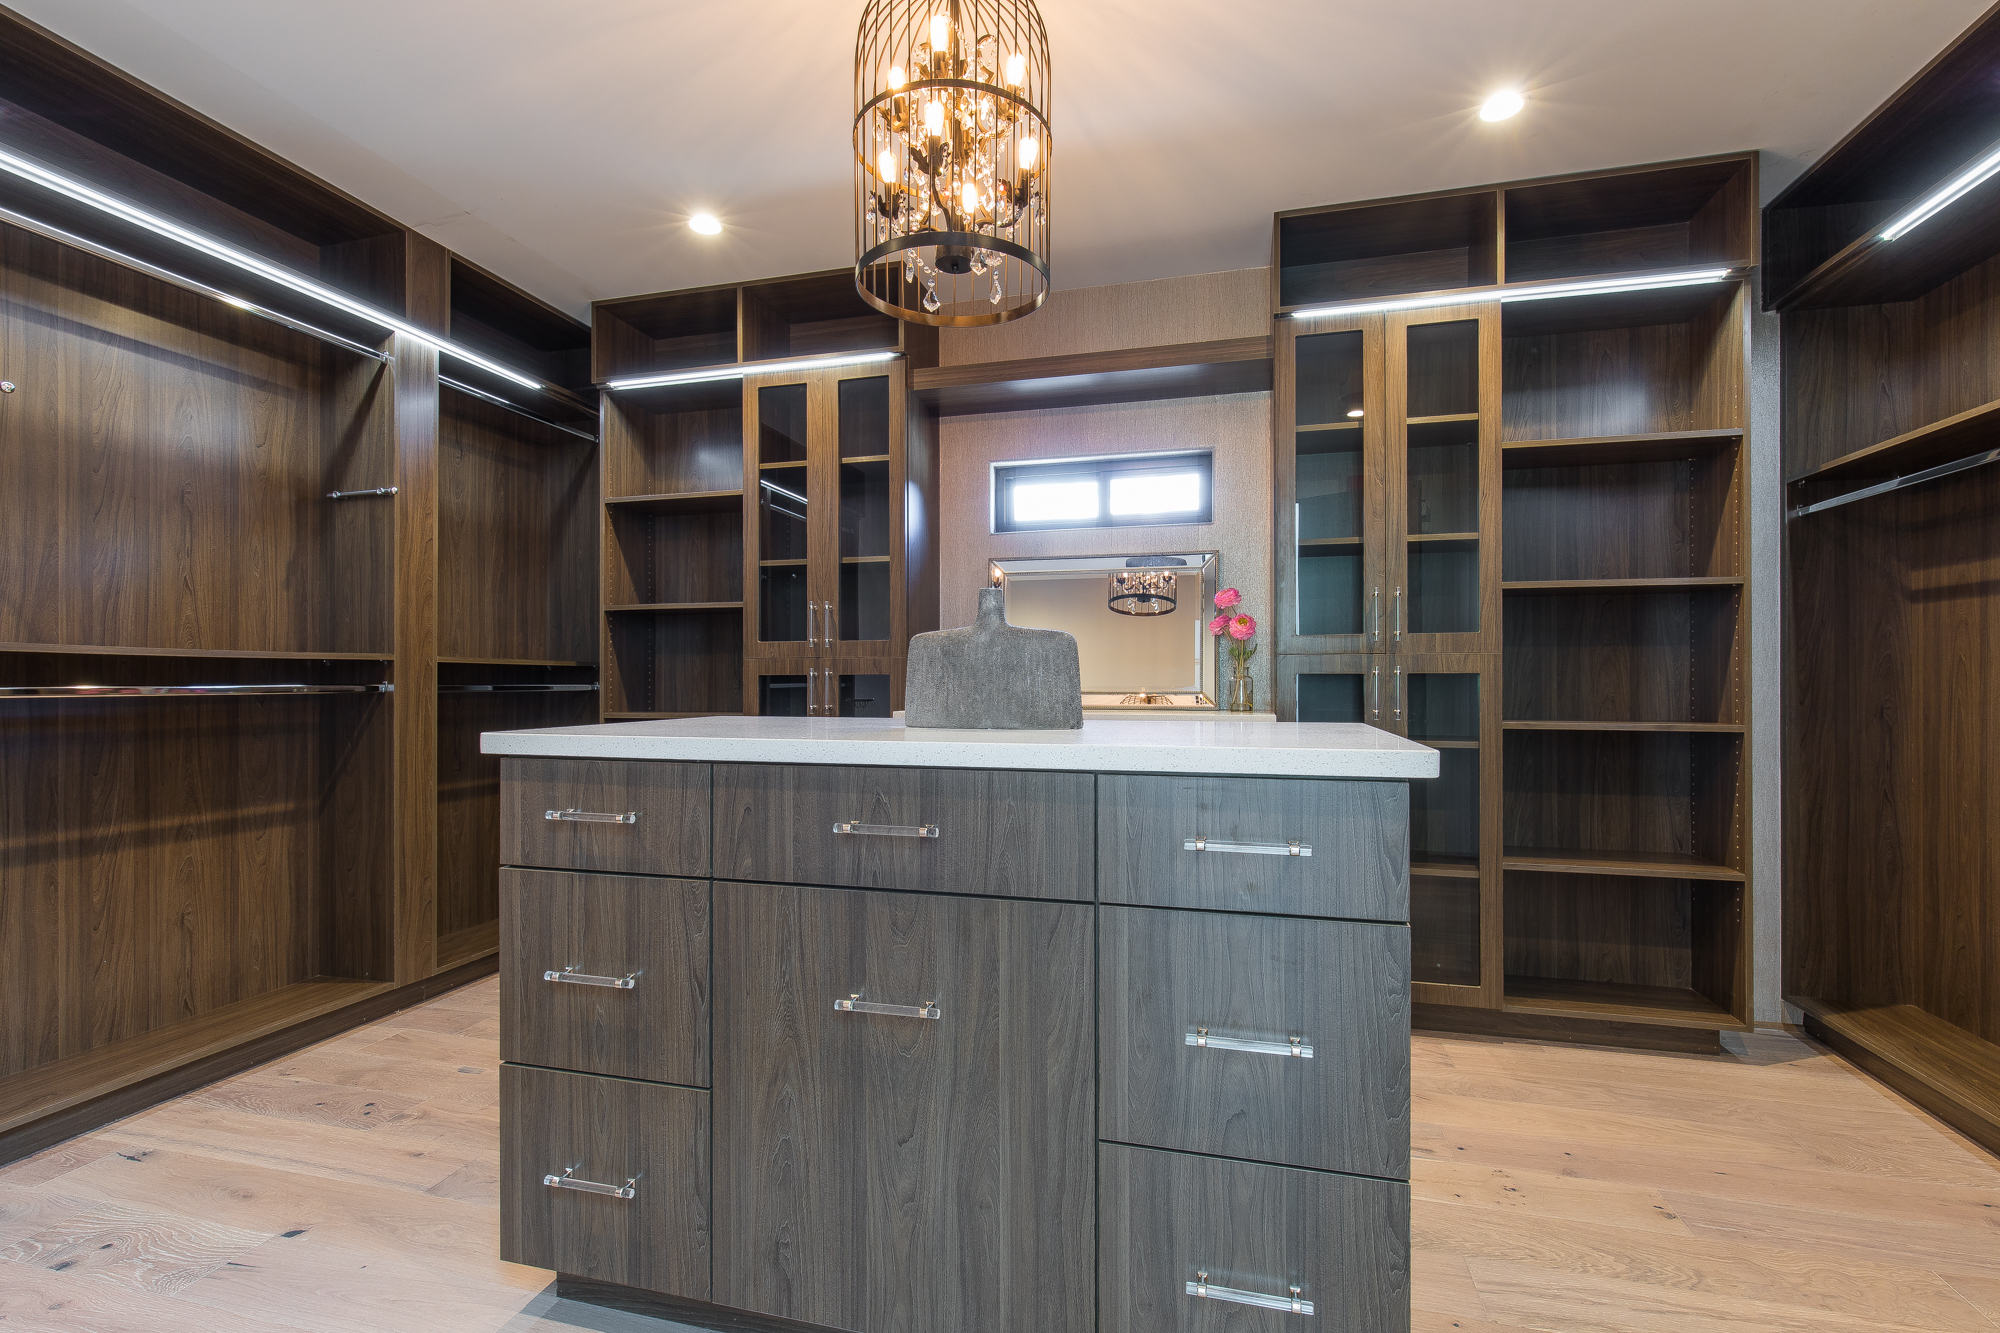  This exquisite suite includes a stunning walk-in closet with custom made glass front cabinetry featuring custom shoe and clothing built ins, pull out valet rods, pull out scarf/tie/belt racks, recessed lighting, vintage bird cage crystal chandelier,